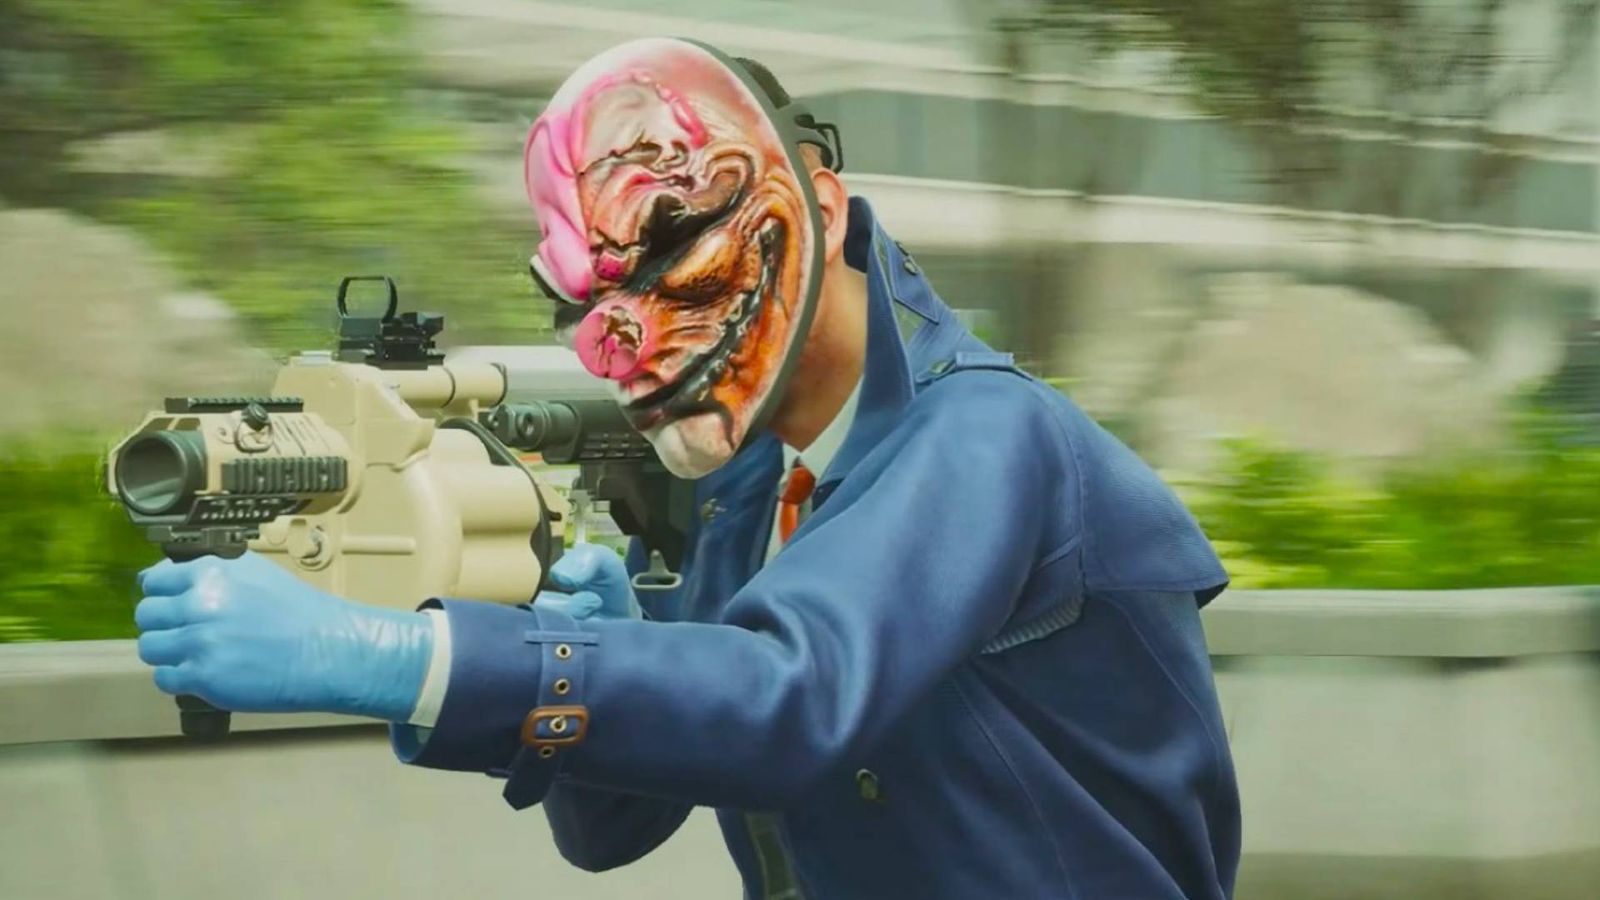 Payday 3 skill builder - A image of a masked person holding a gun